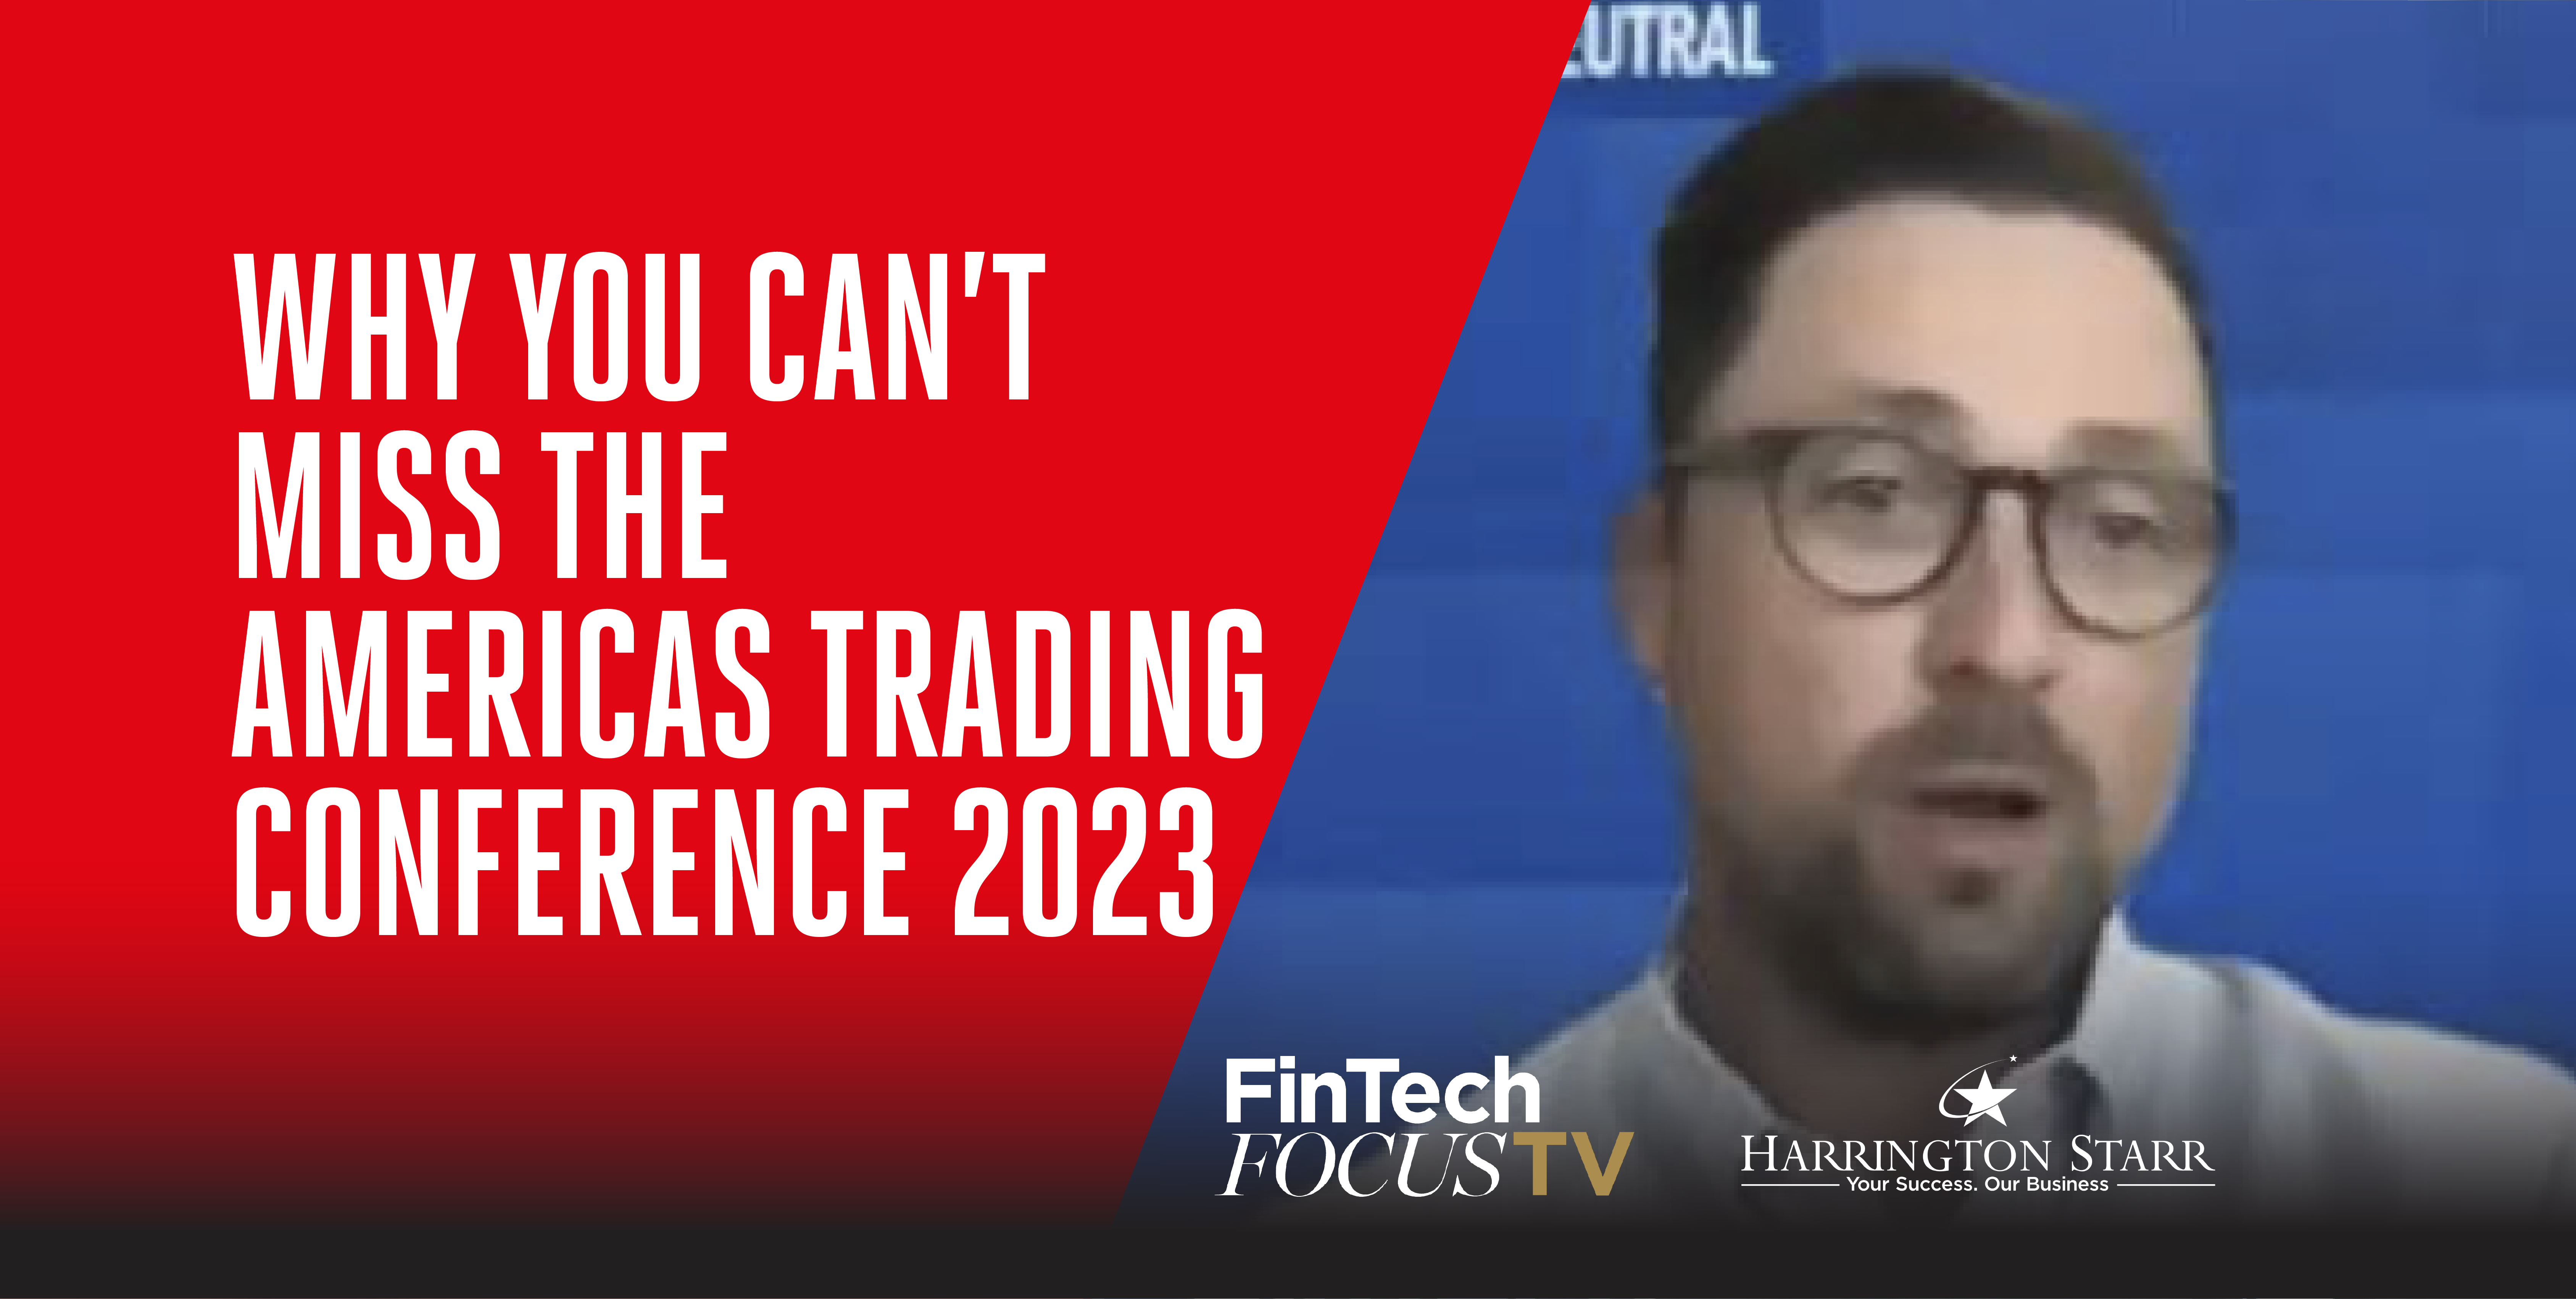 Why You Can’t Miss the Americas Trading Conference 2023